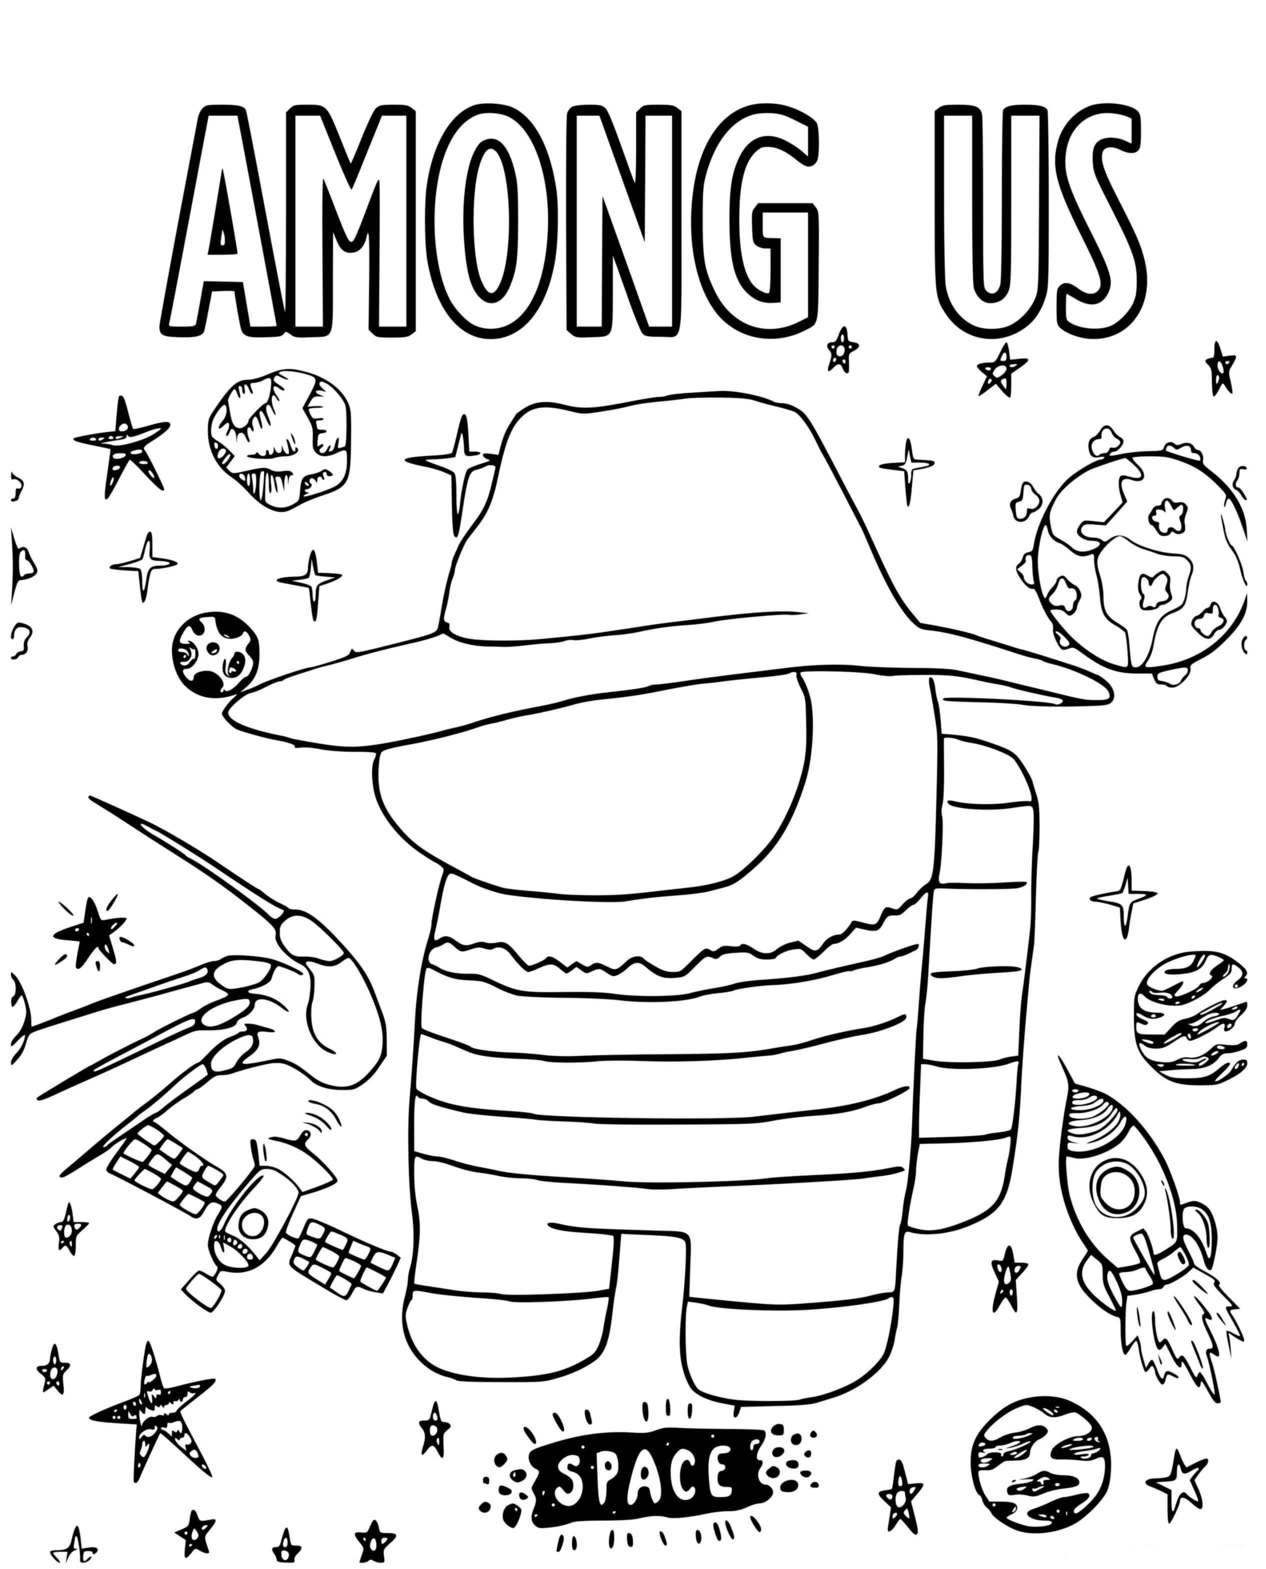 Among Us Space Coloring Pages   Coloring Cool